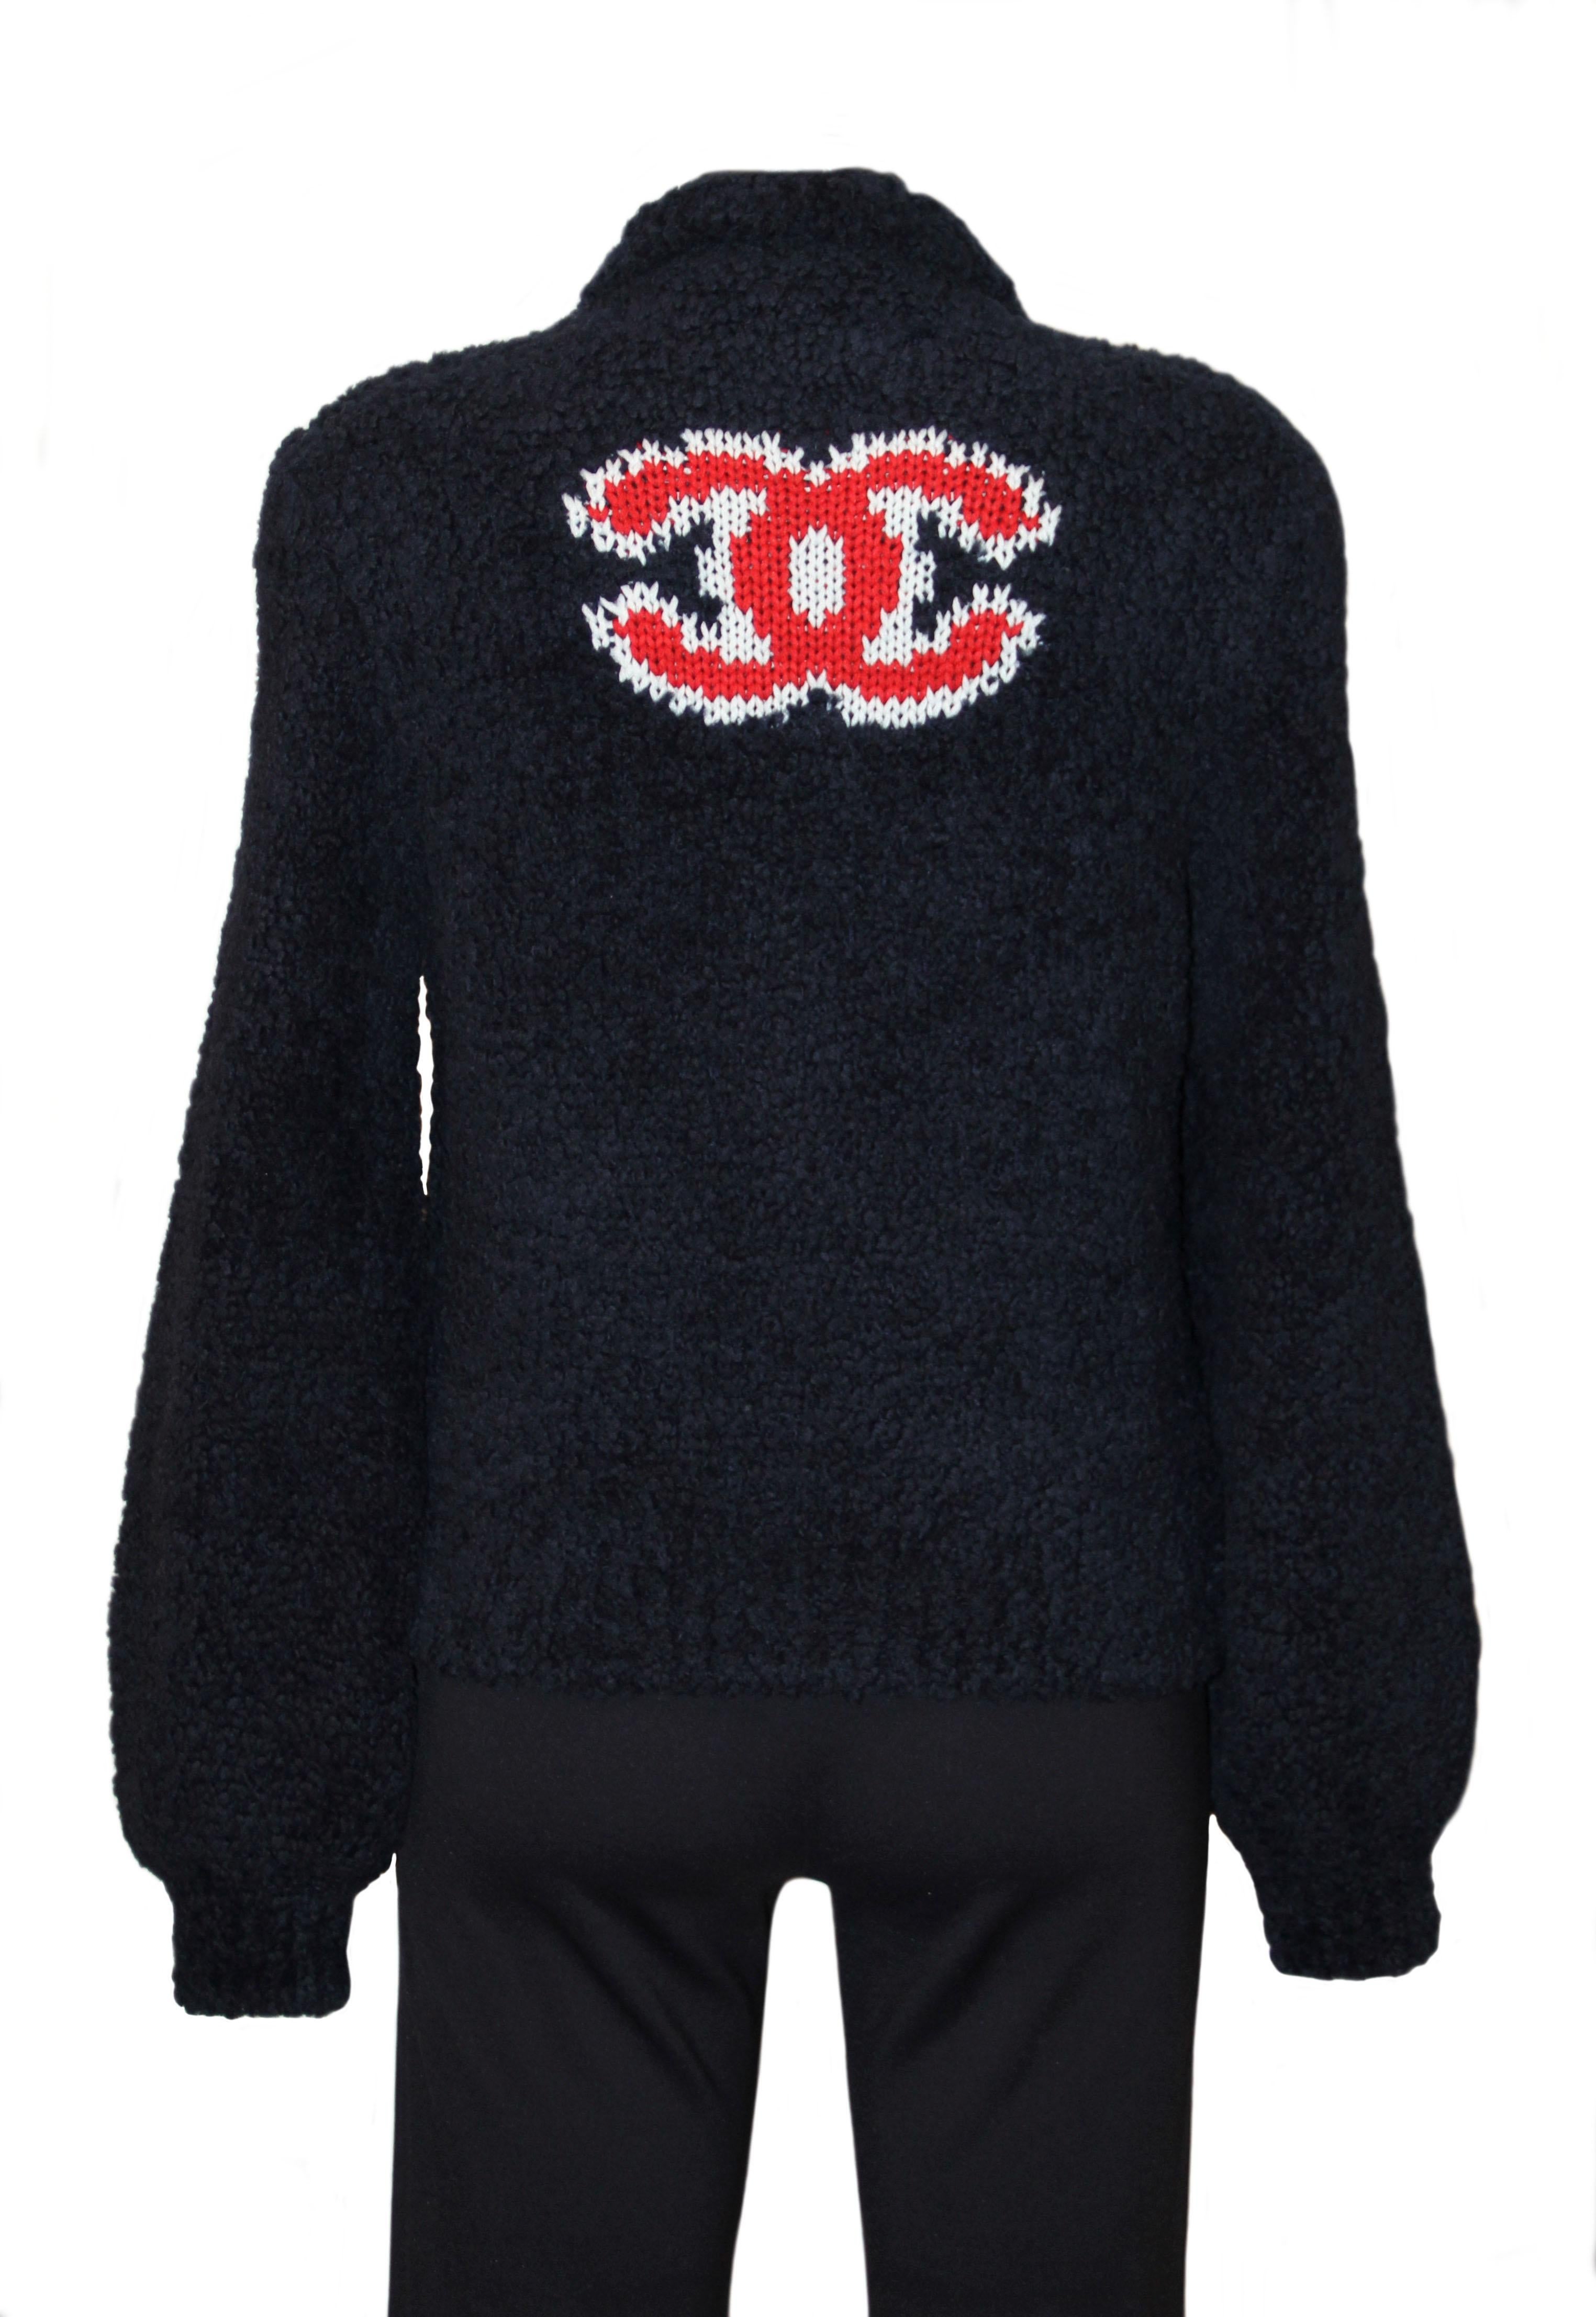 From the last collection of Karl Lagerfeld for the House of Chanel, this new pre-owned Teddy zip up jacket is crafted in a beautiful darl blue tone wool mix with a shearling look !
It features a red and white CC Logo on the back as well as red and